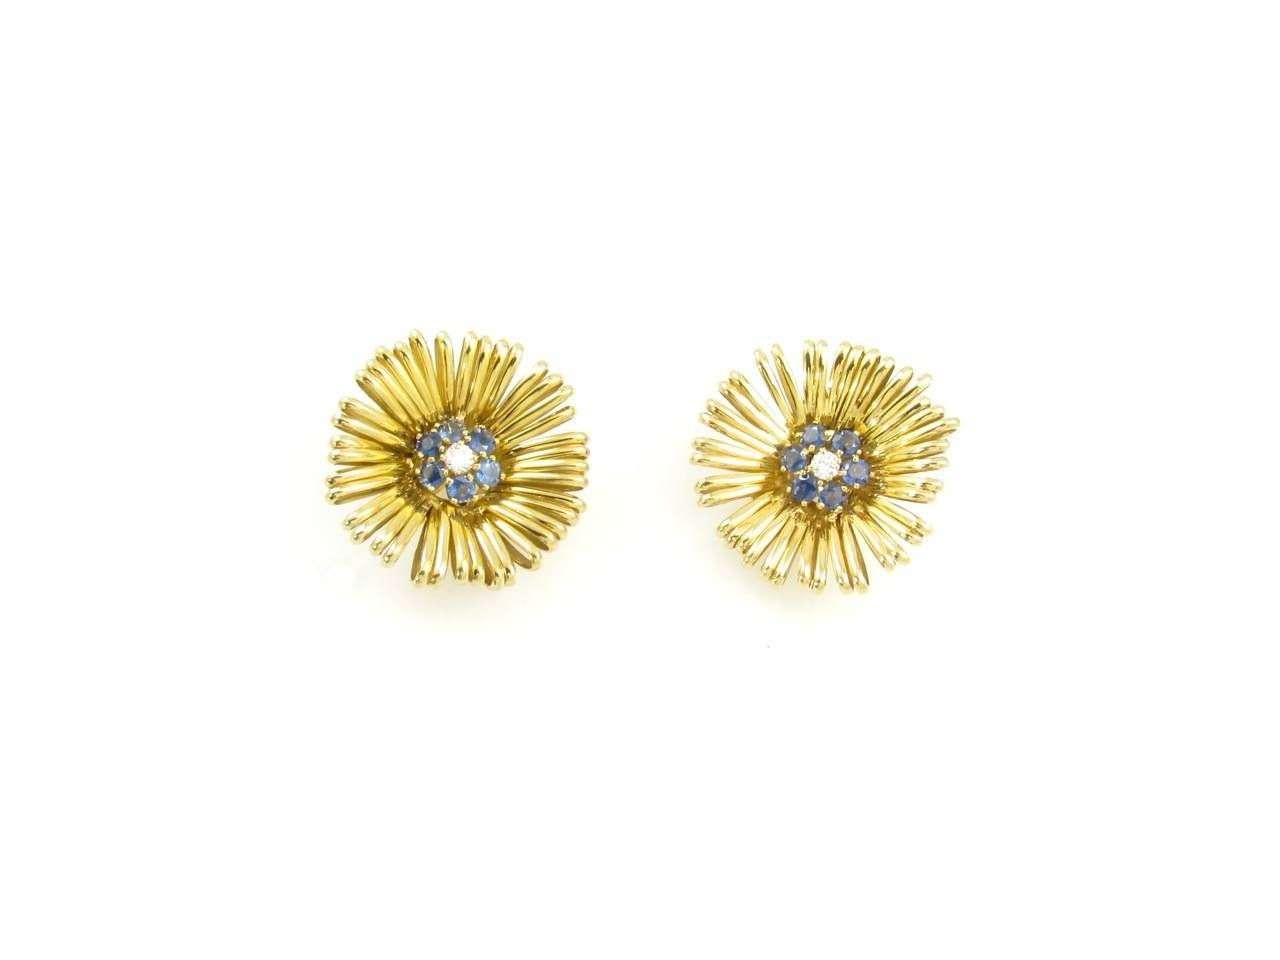 A pair of 18 karat yellow gold wire form stylized flower earrings set with a sapphire and diamond cluster center, circa 1955.  The 18 karat earrings are set with 14 karat yellow gold heavy clip mechanisms.  The centers are each set with 6 round